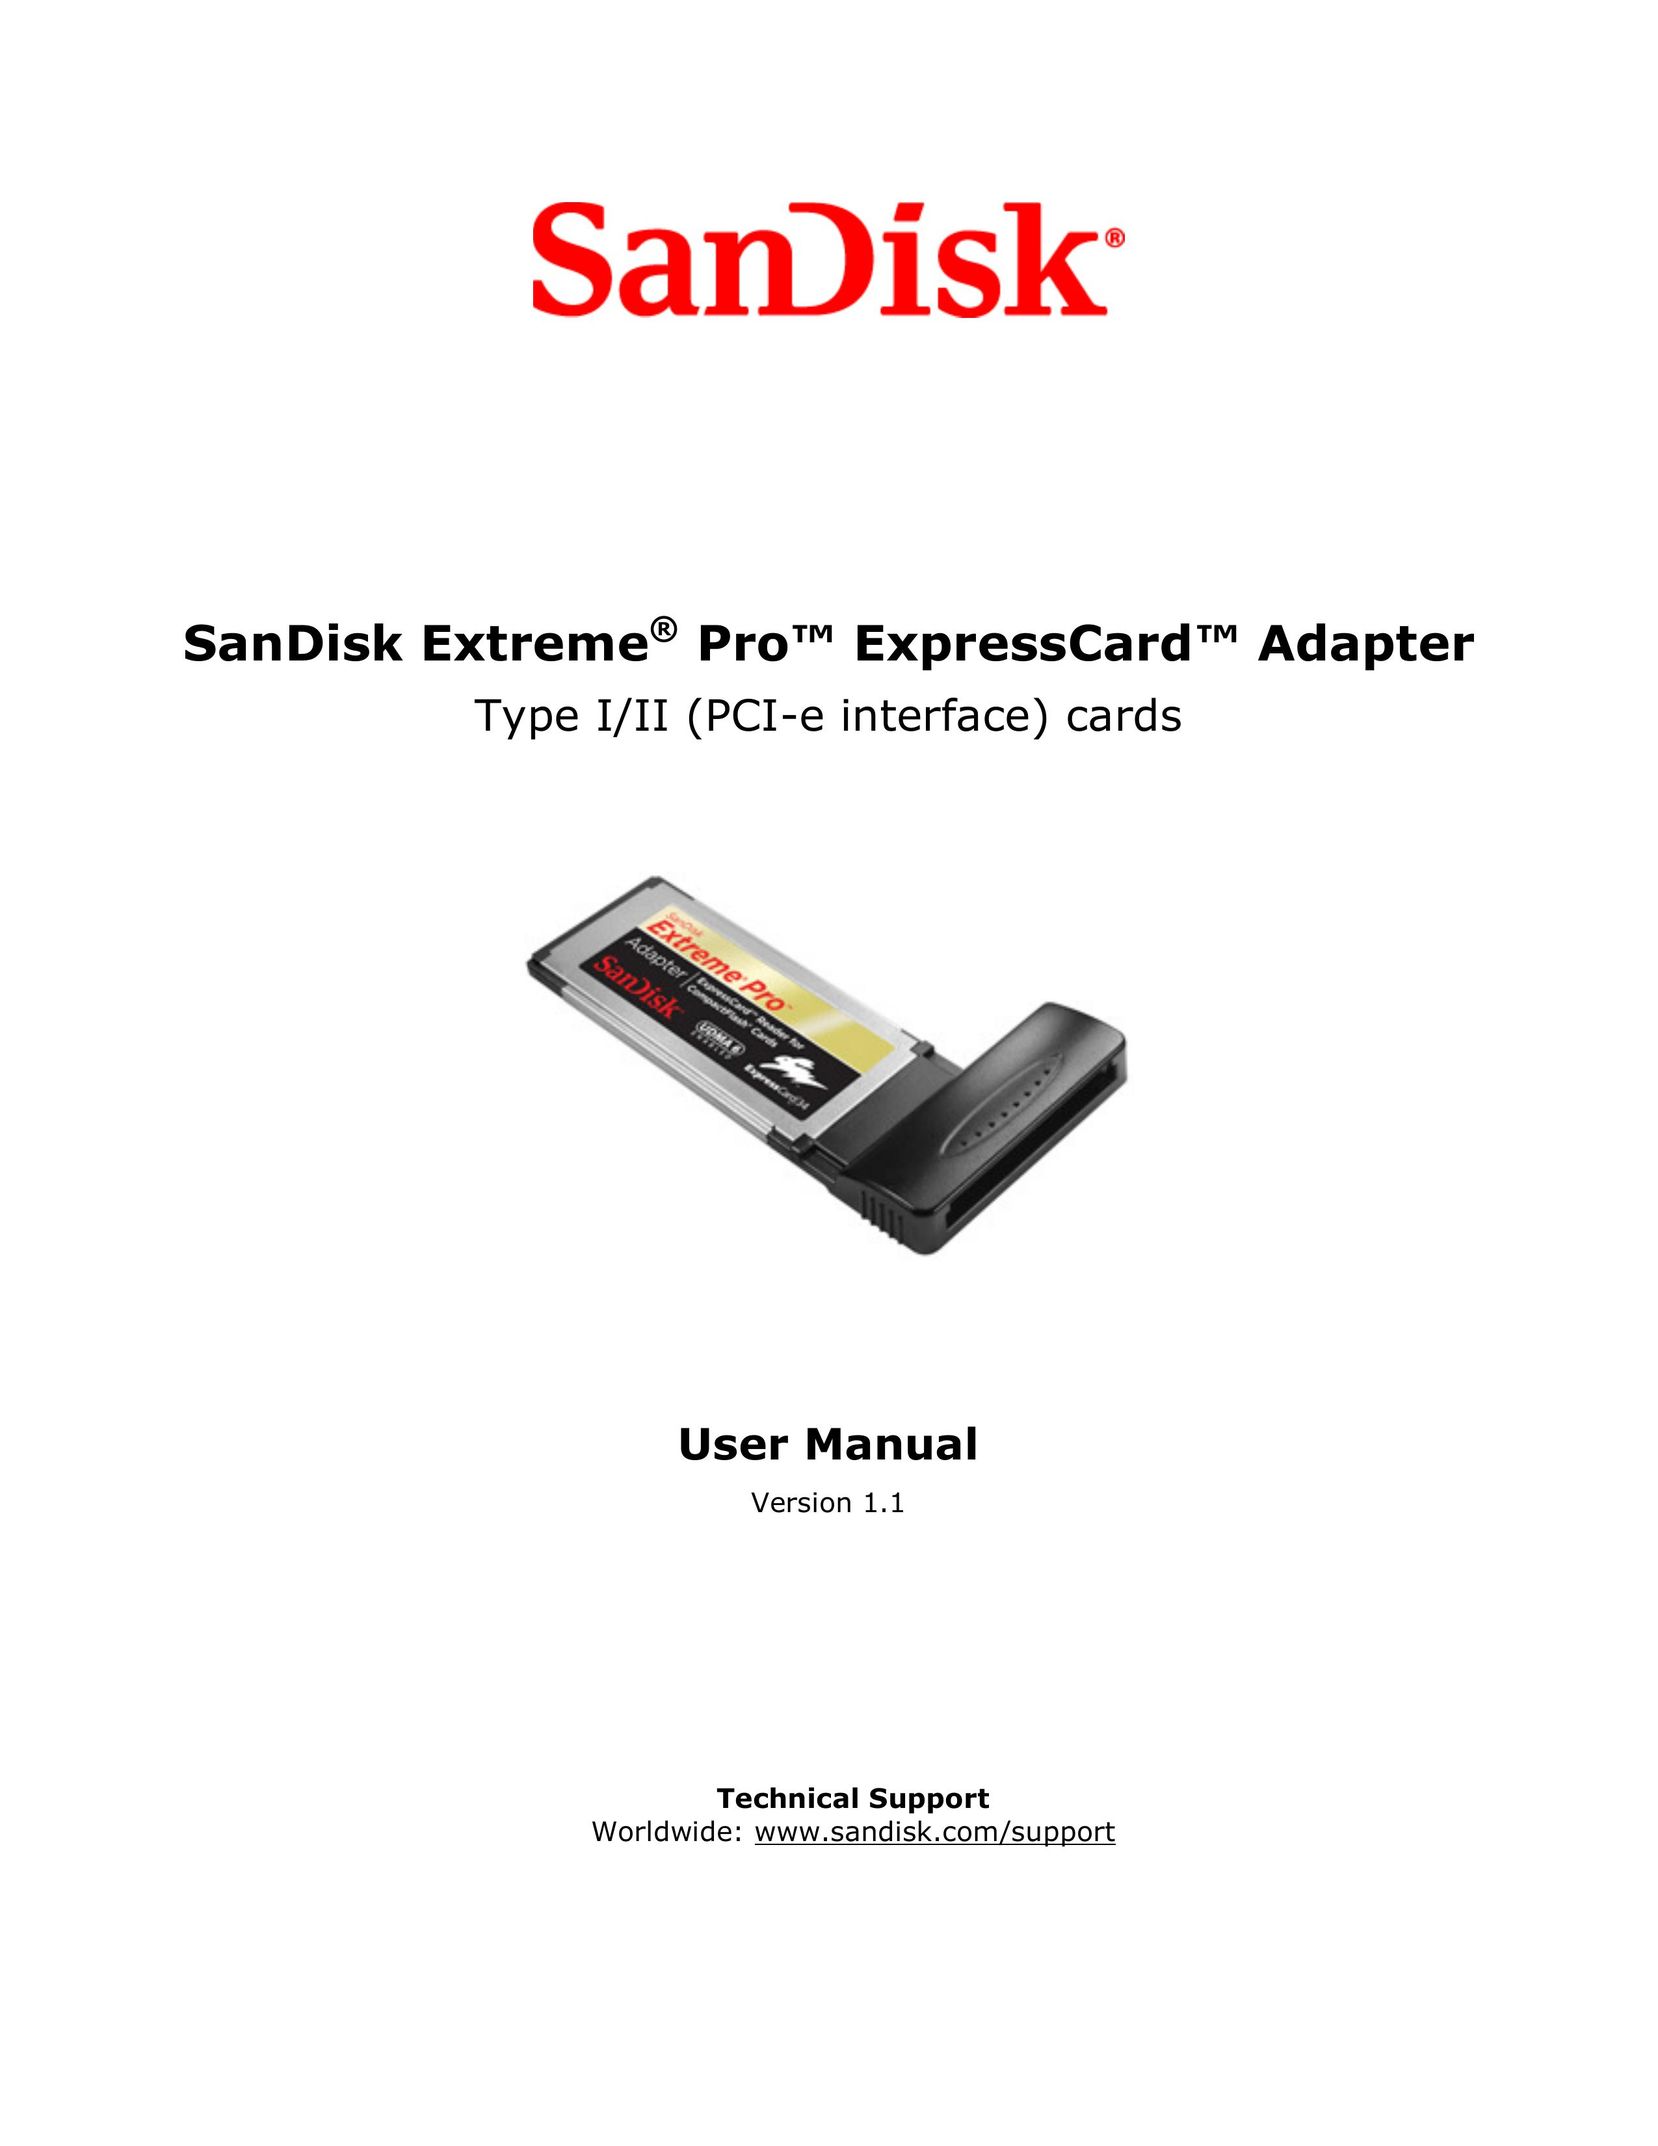 SanDisk Type I/II (PCI-e Interface) Cards Network Card User Manual